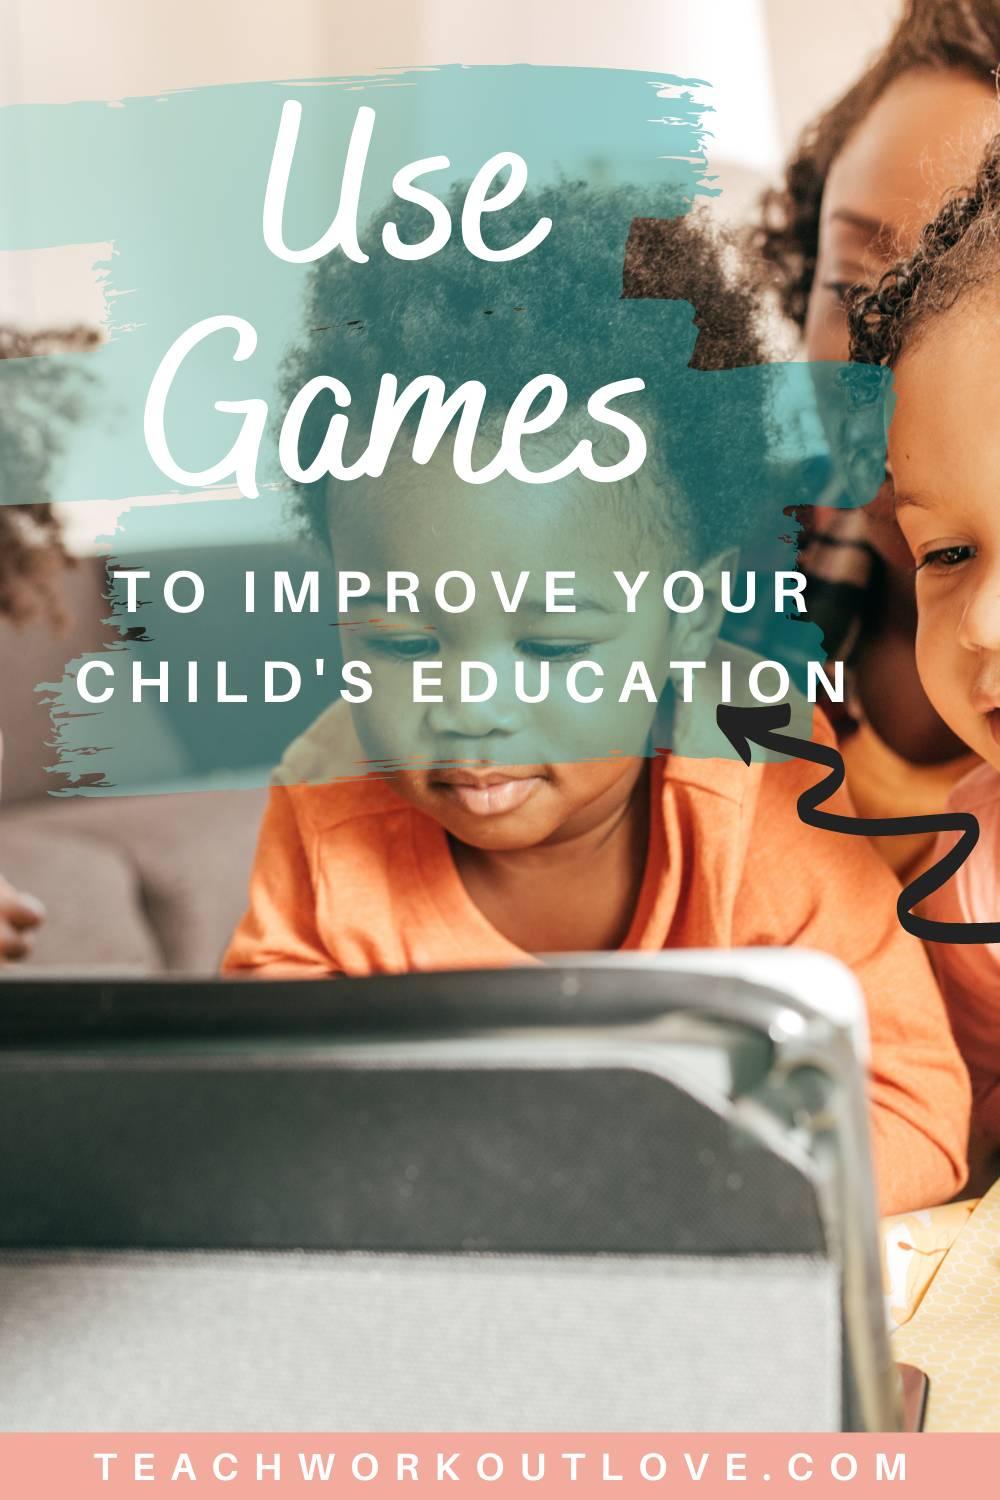 Games can play a major role to support child's education. Here are 3 ways to use games to improve your child's education.